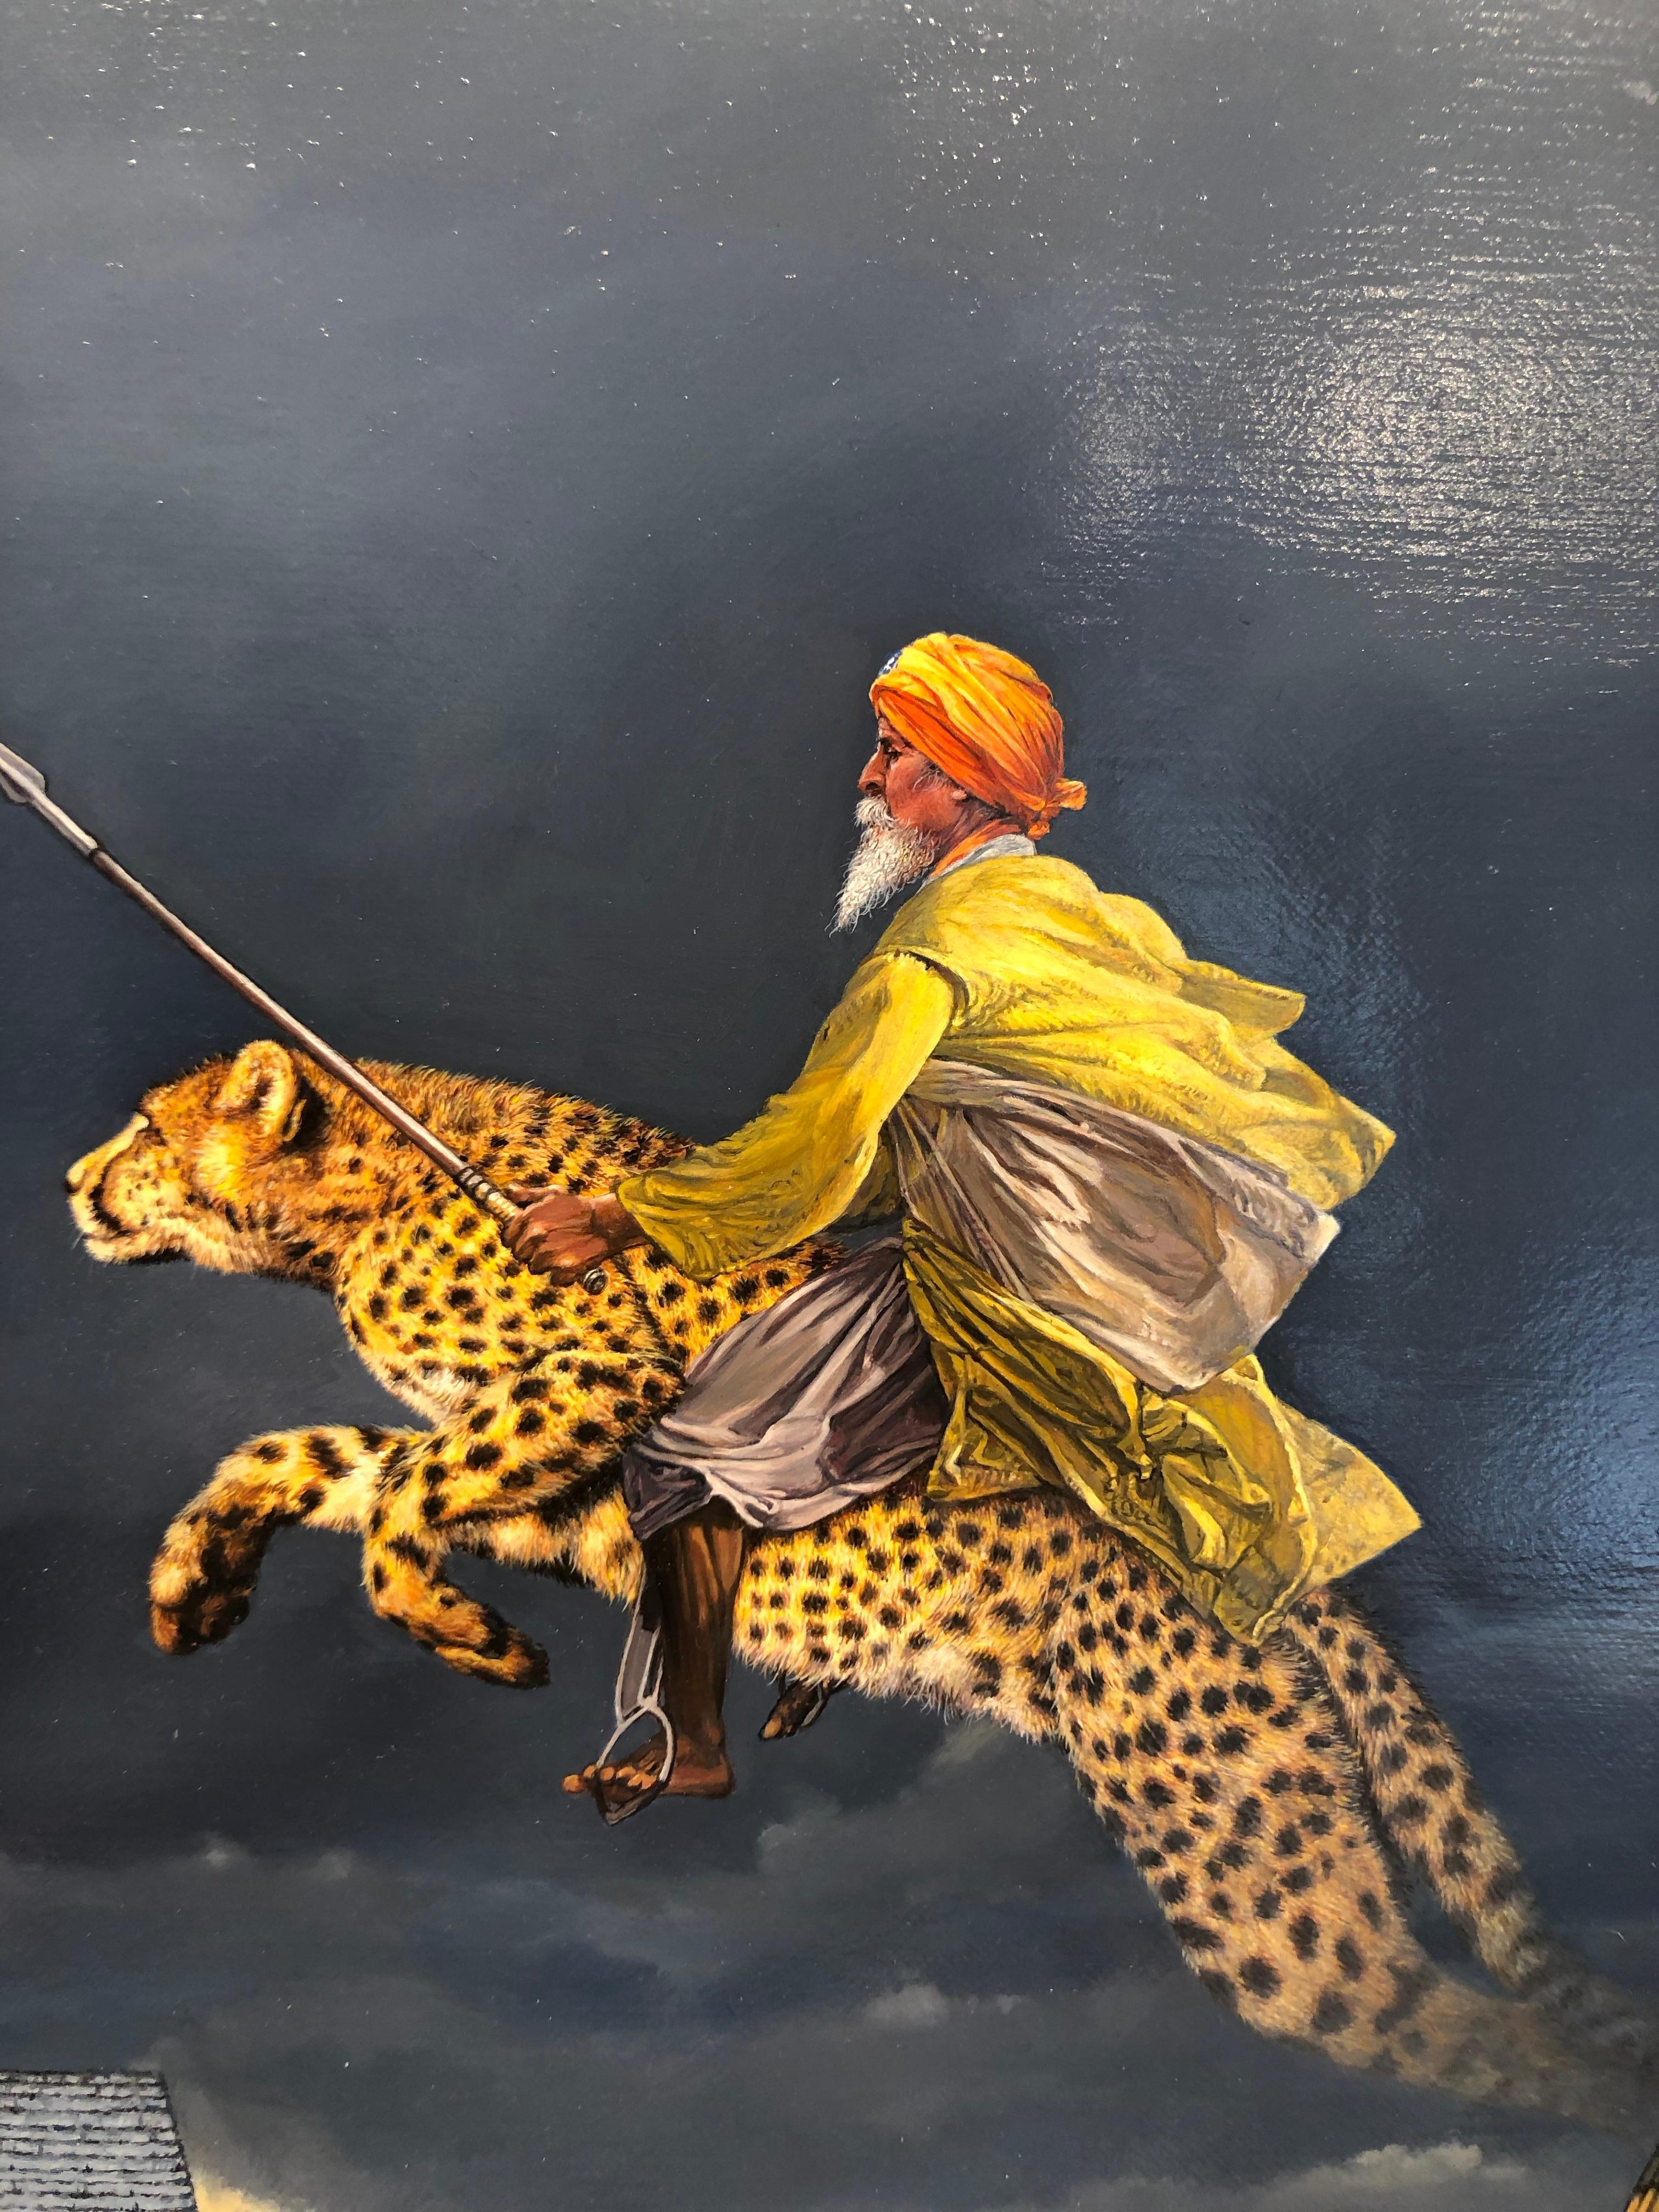 Toying (e.g., rider on toy horse) with violent threats is not wise. The sounds (e.g., horn) of violence (e.g., spear and leopard) will never overtake wisdom (e.g., owl and pearl).  This masterfully painted surrealist artwork draws in the viewer with